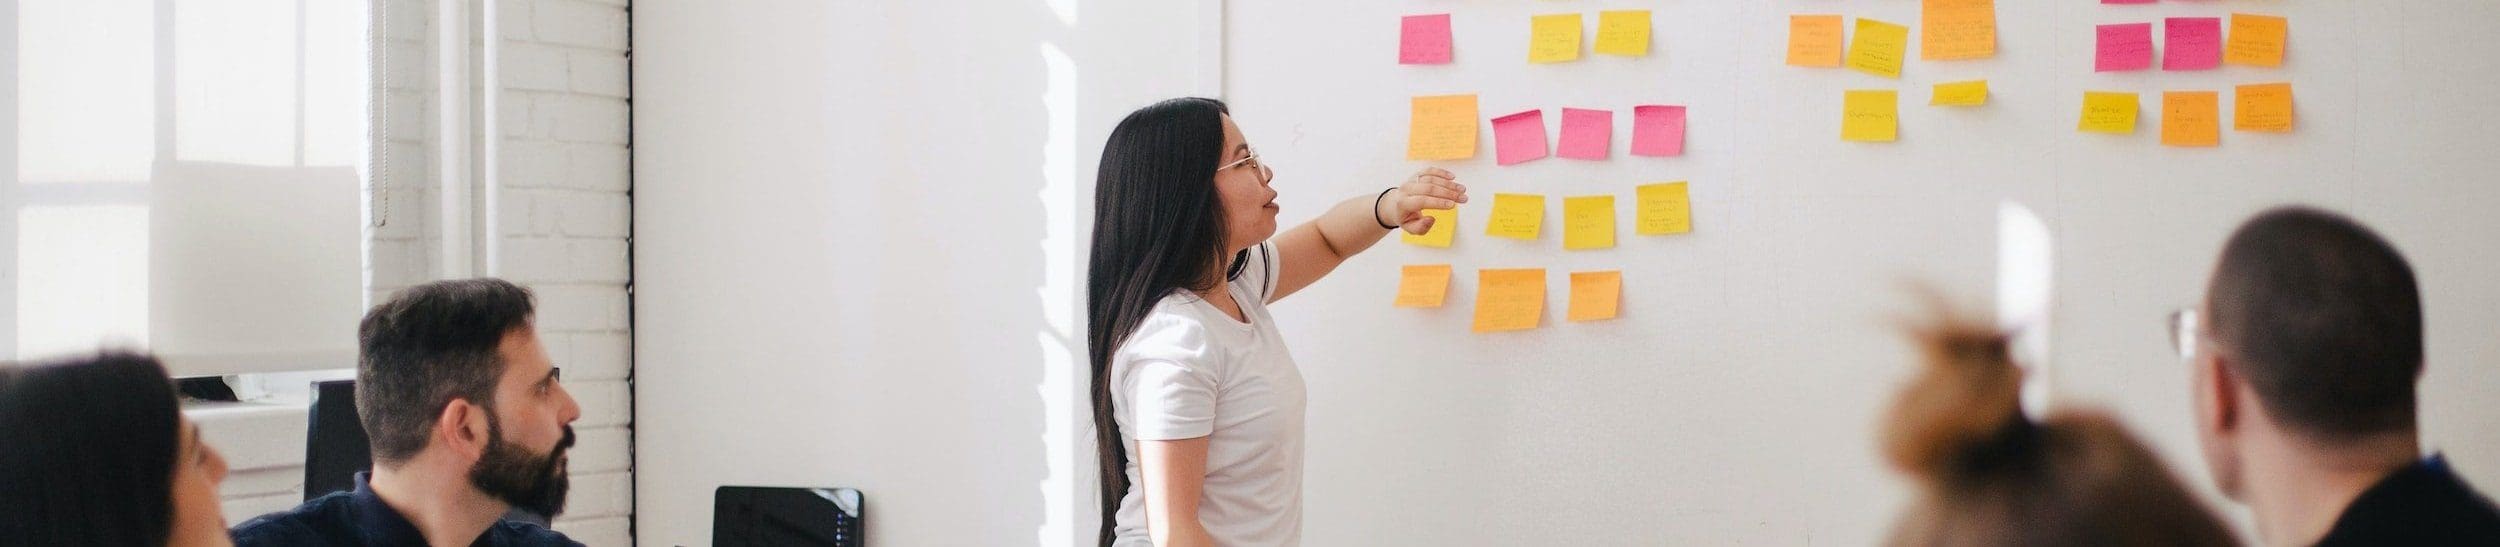 a young woman stood near a white board with sticky notes all over it, she is explaining something to the rest of the people in the room.